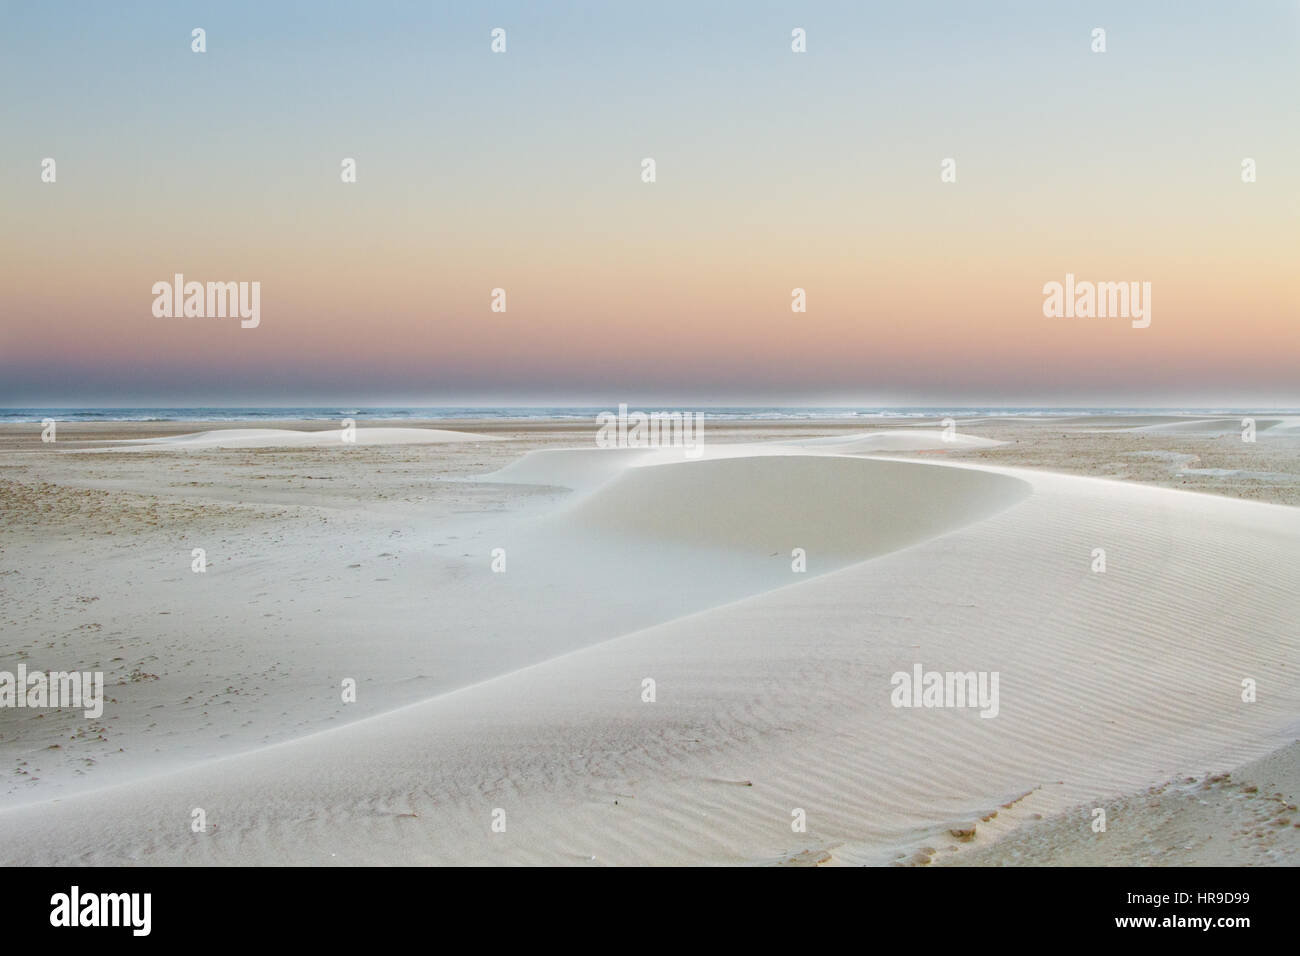 Dreamy landscape, sunrise on a vast beach with small barchan dunes (foredunes) Stock Photo